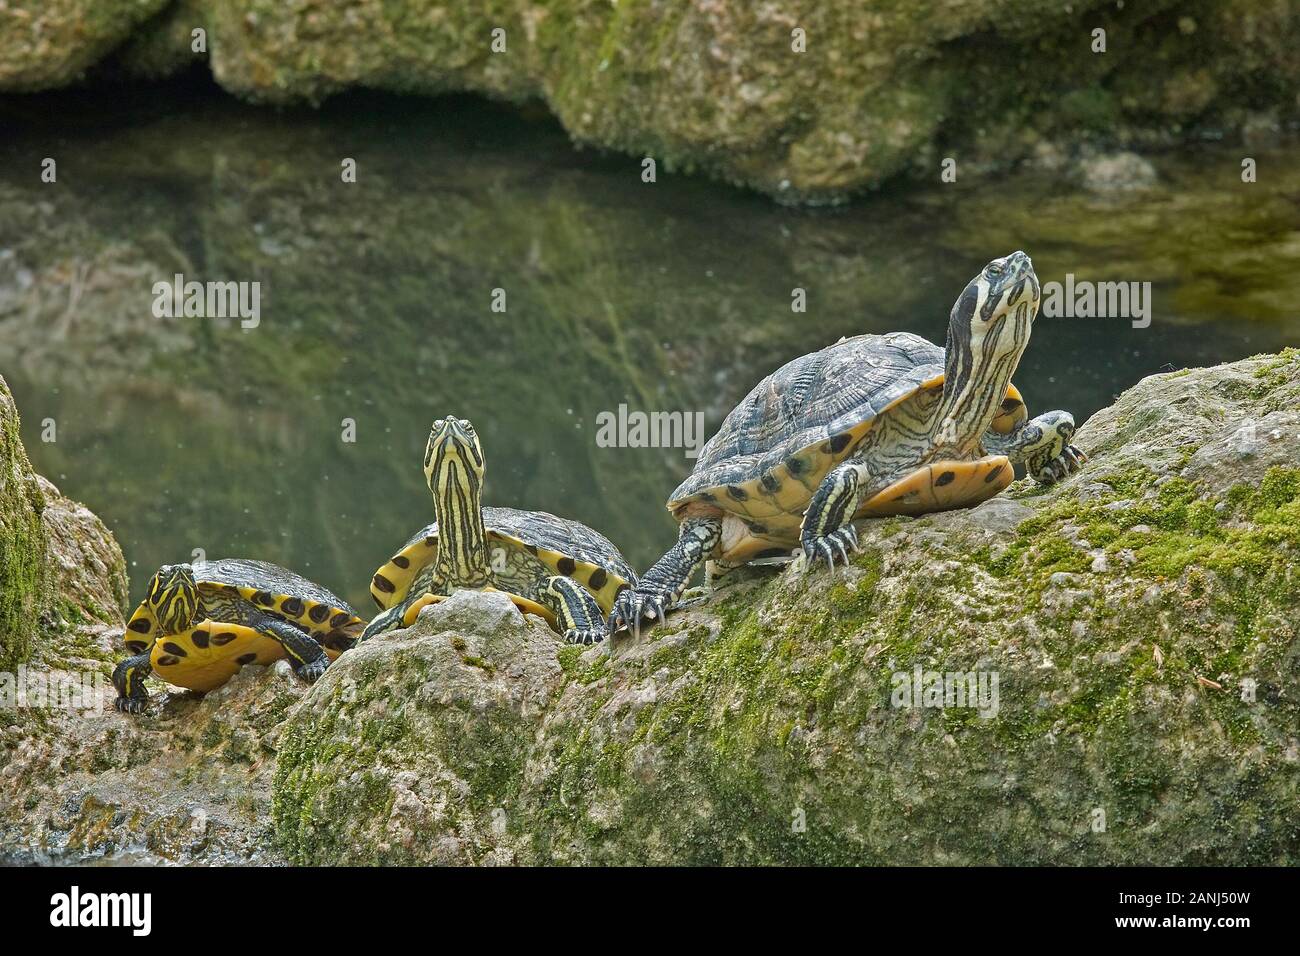 Three specimens of yellow-bellied sliders get warm in the sun Stock Photo